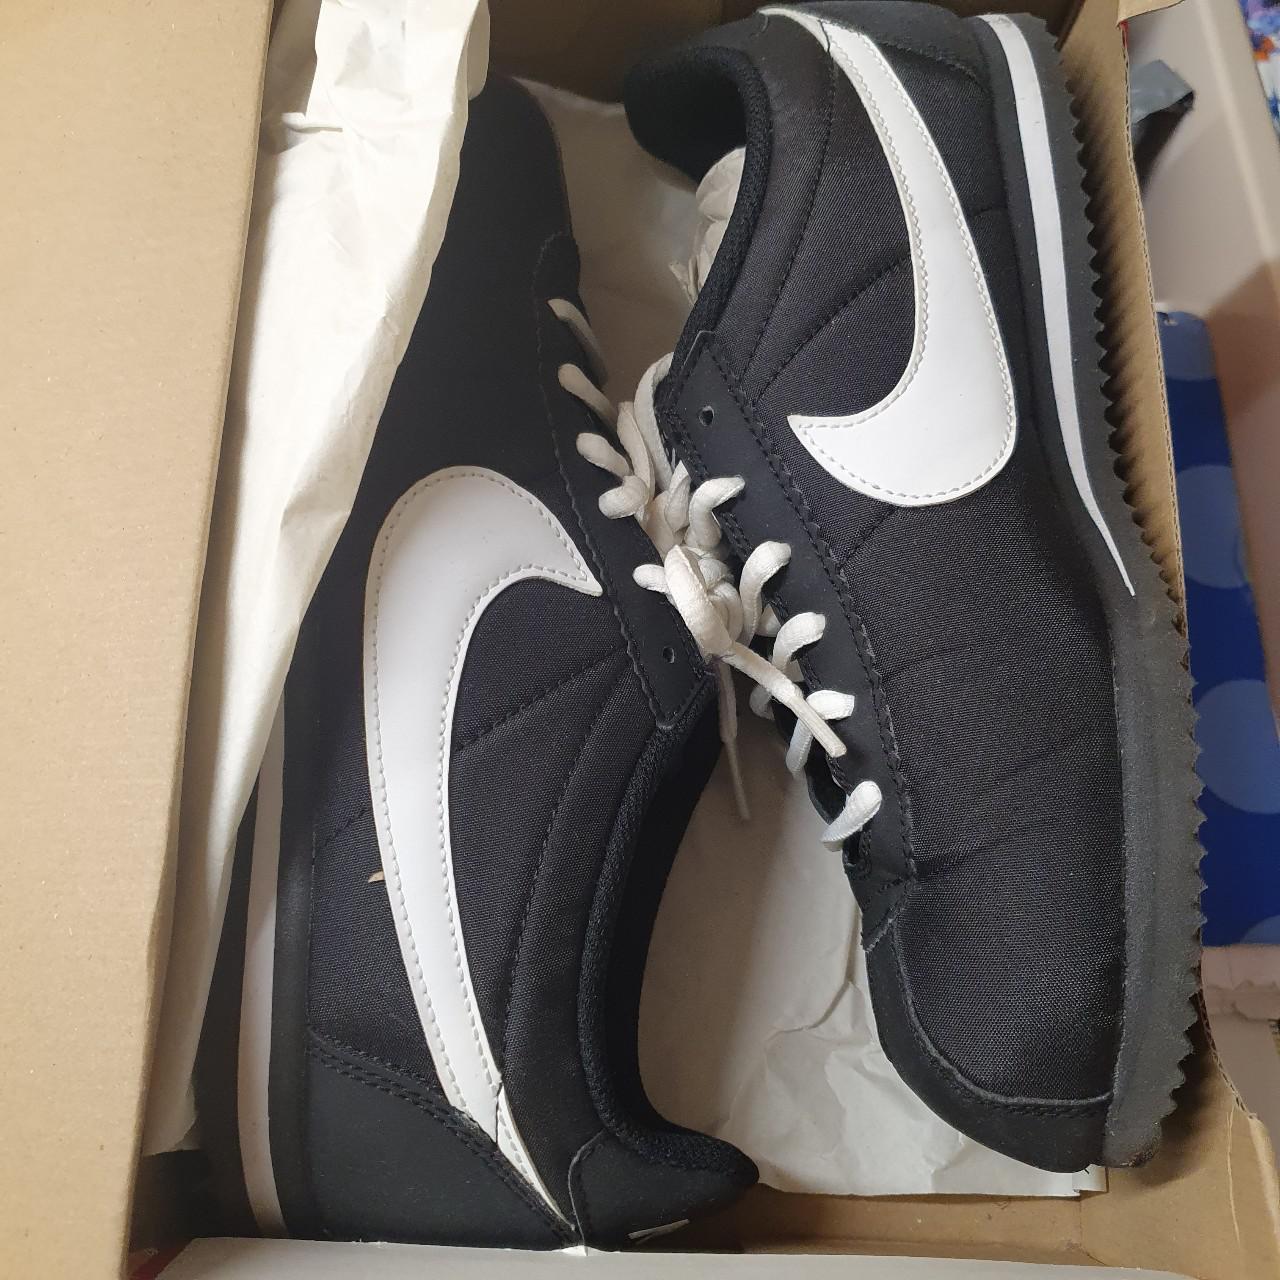 Nike cortez black and white, worn once, in good... - Depop